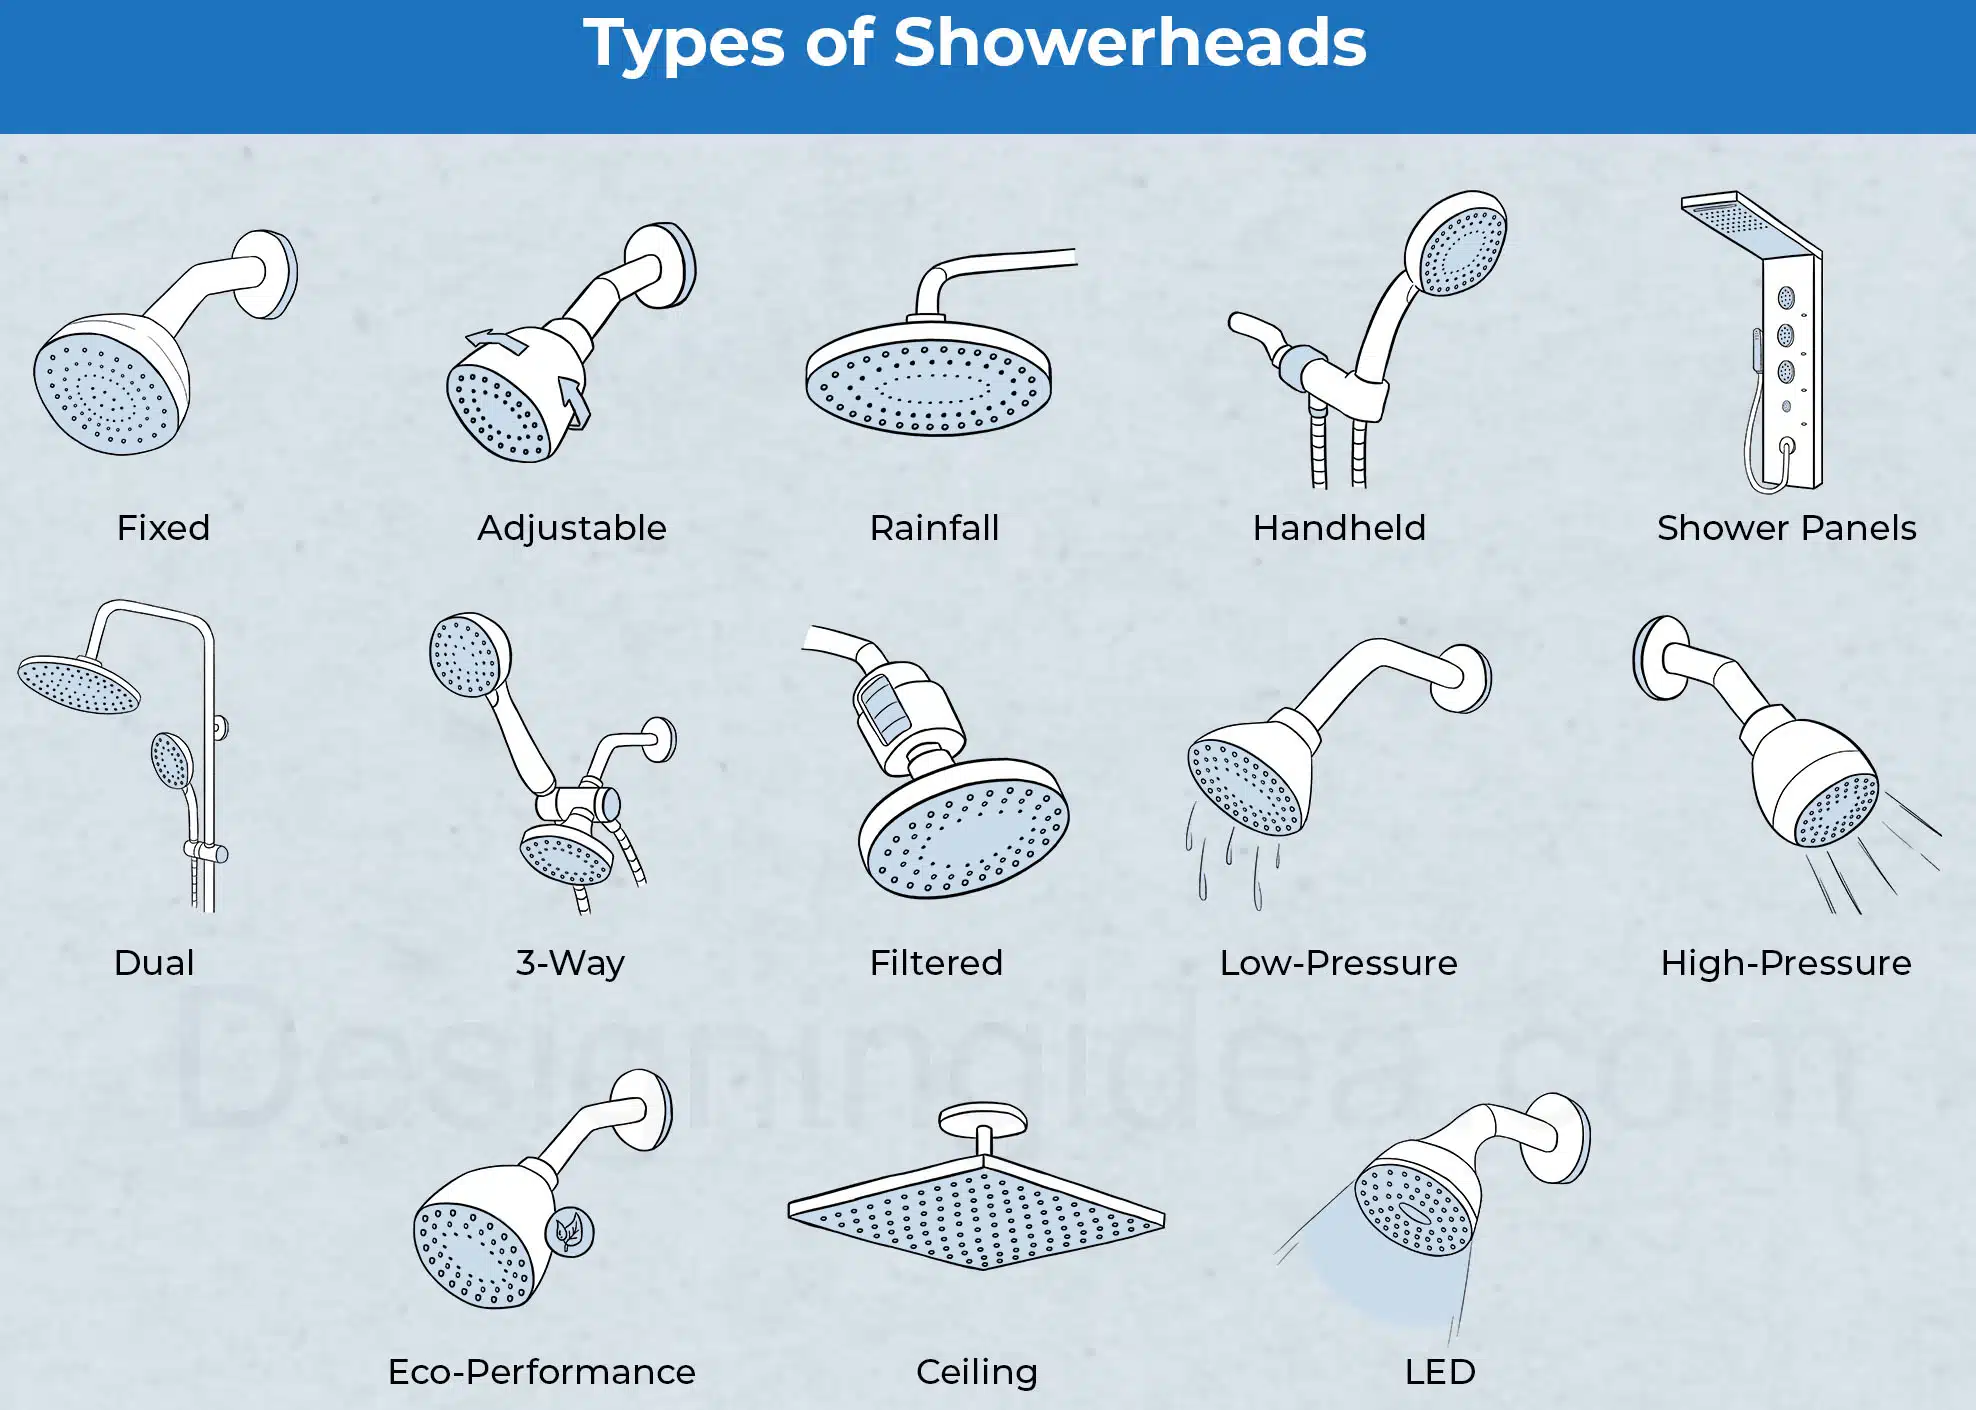 Types of showerheads